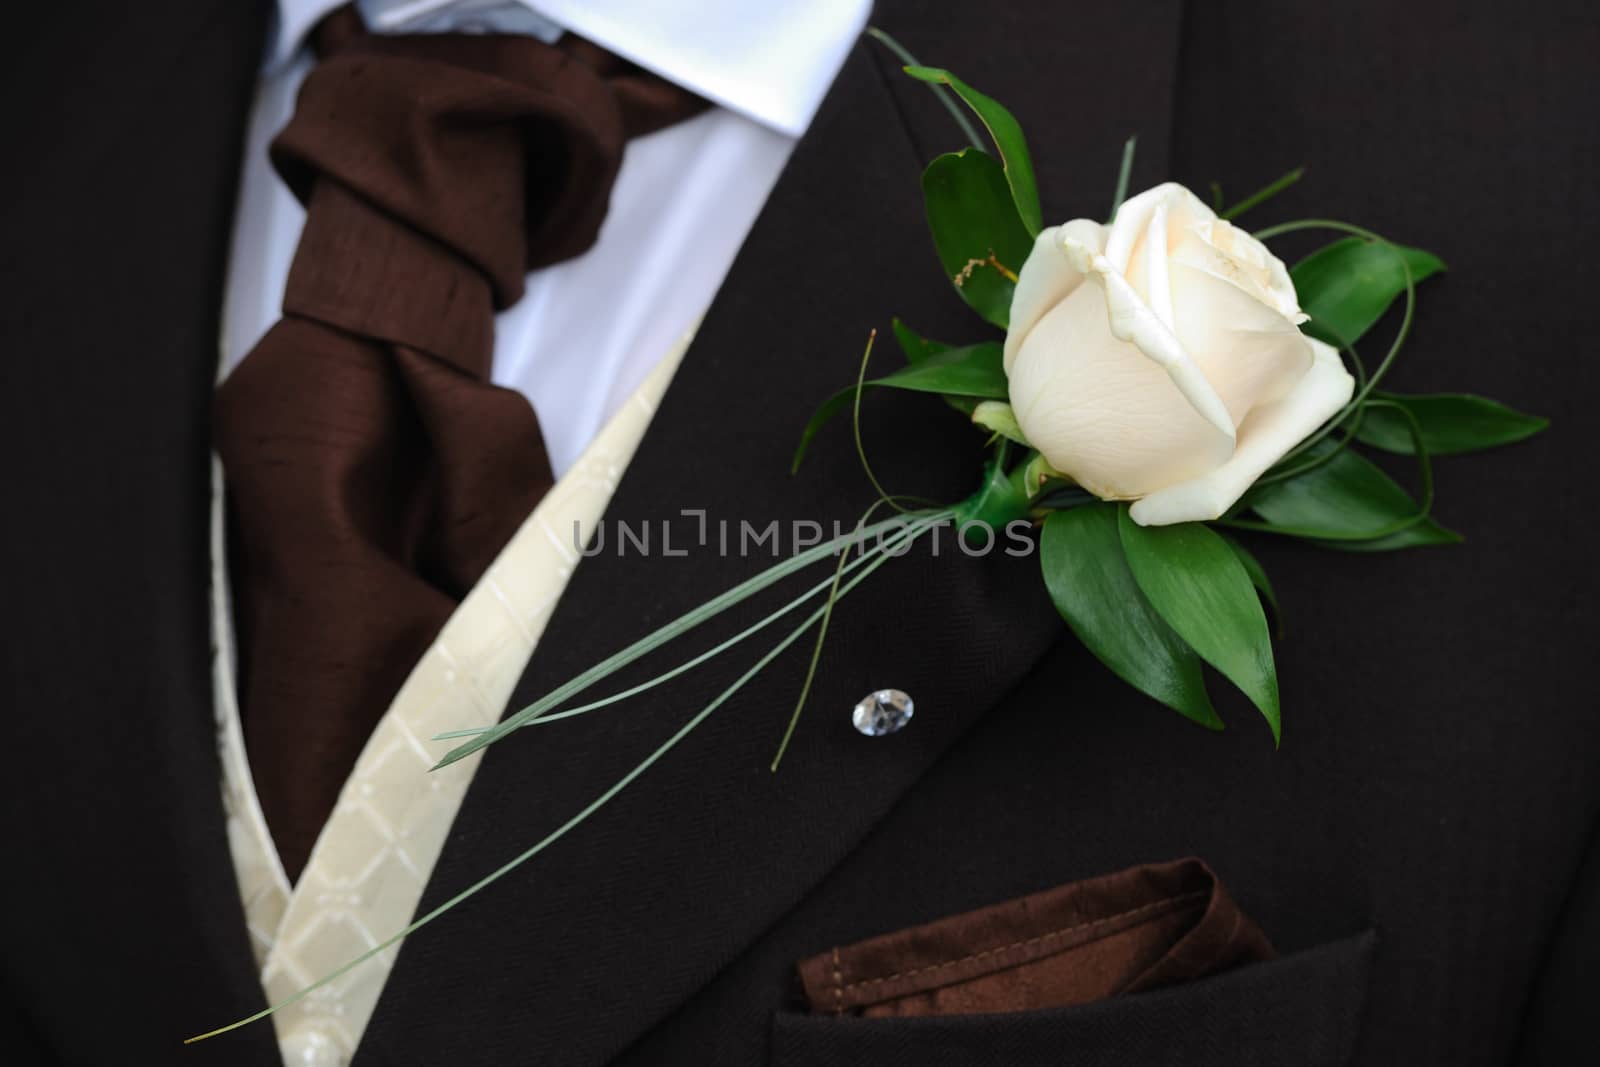 Grooms flower and cravat. by kmwphotography